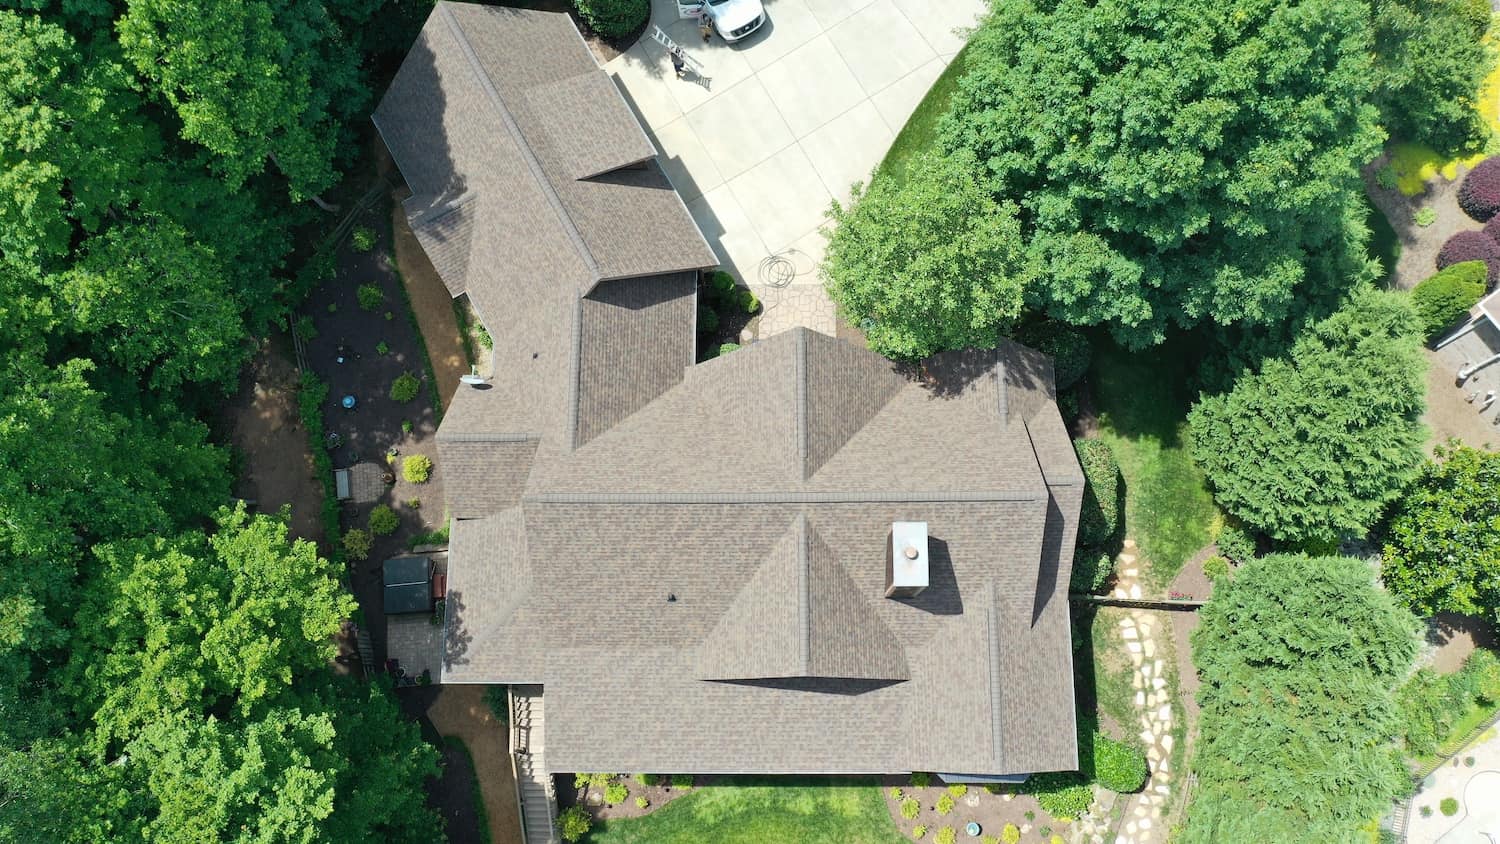 http://top%20aerial%20view%20of%20trudefinition%20duration%20teak%20shingles%20on%20residential%20home%20and%20green%20trees